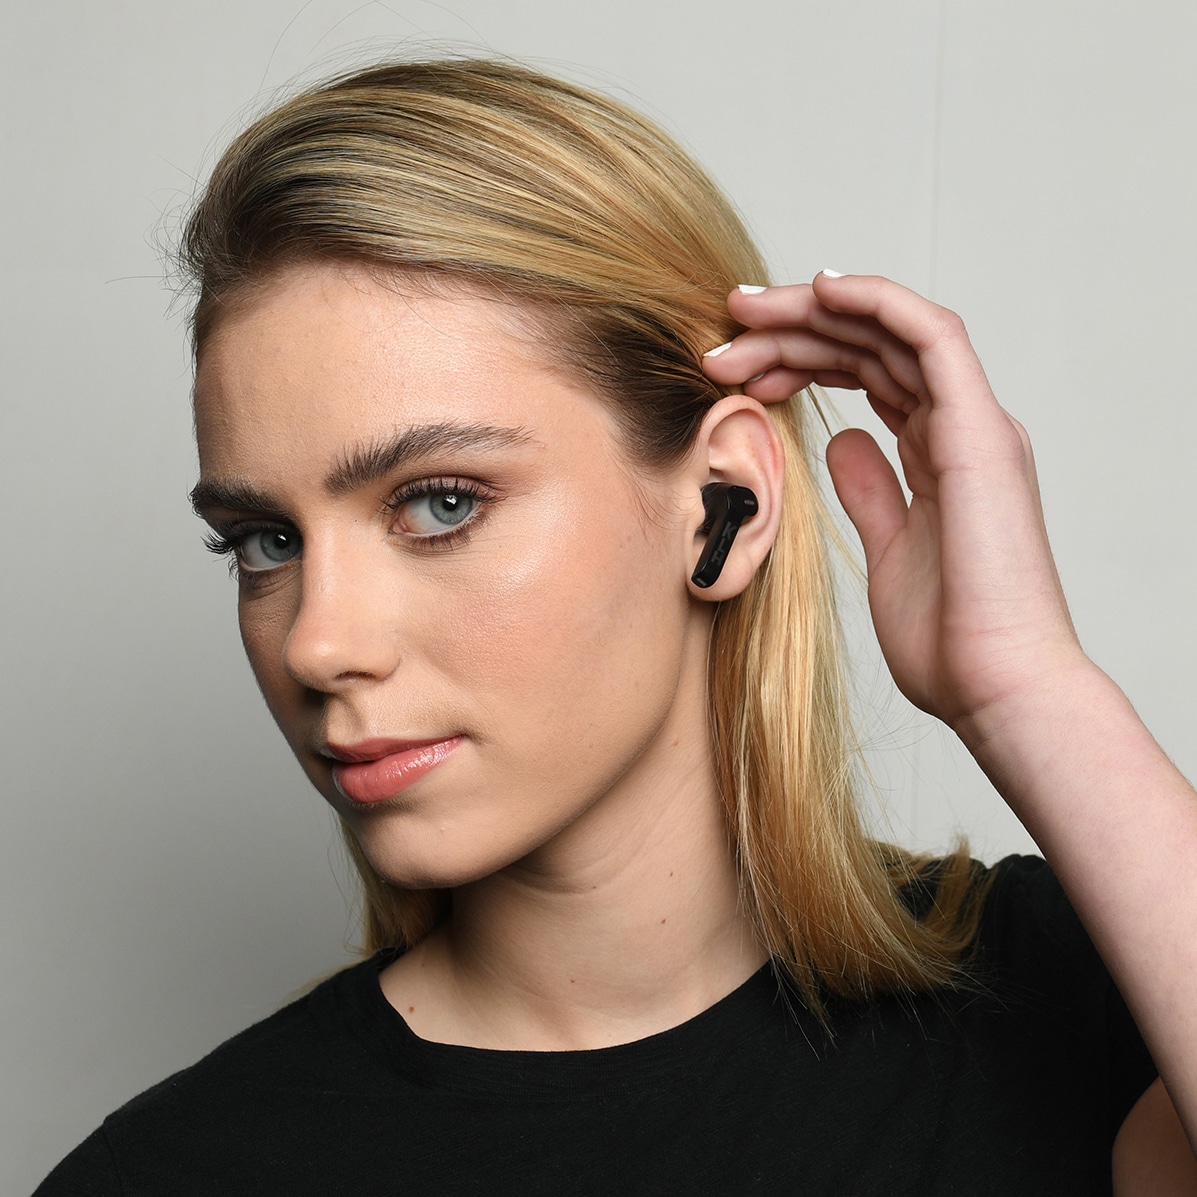 Xiaomi Redmi Buds 3 Lite lightweight earbuds stay snug in your ears even  during exercise » Gadget Flow